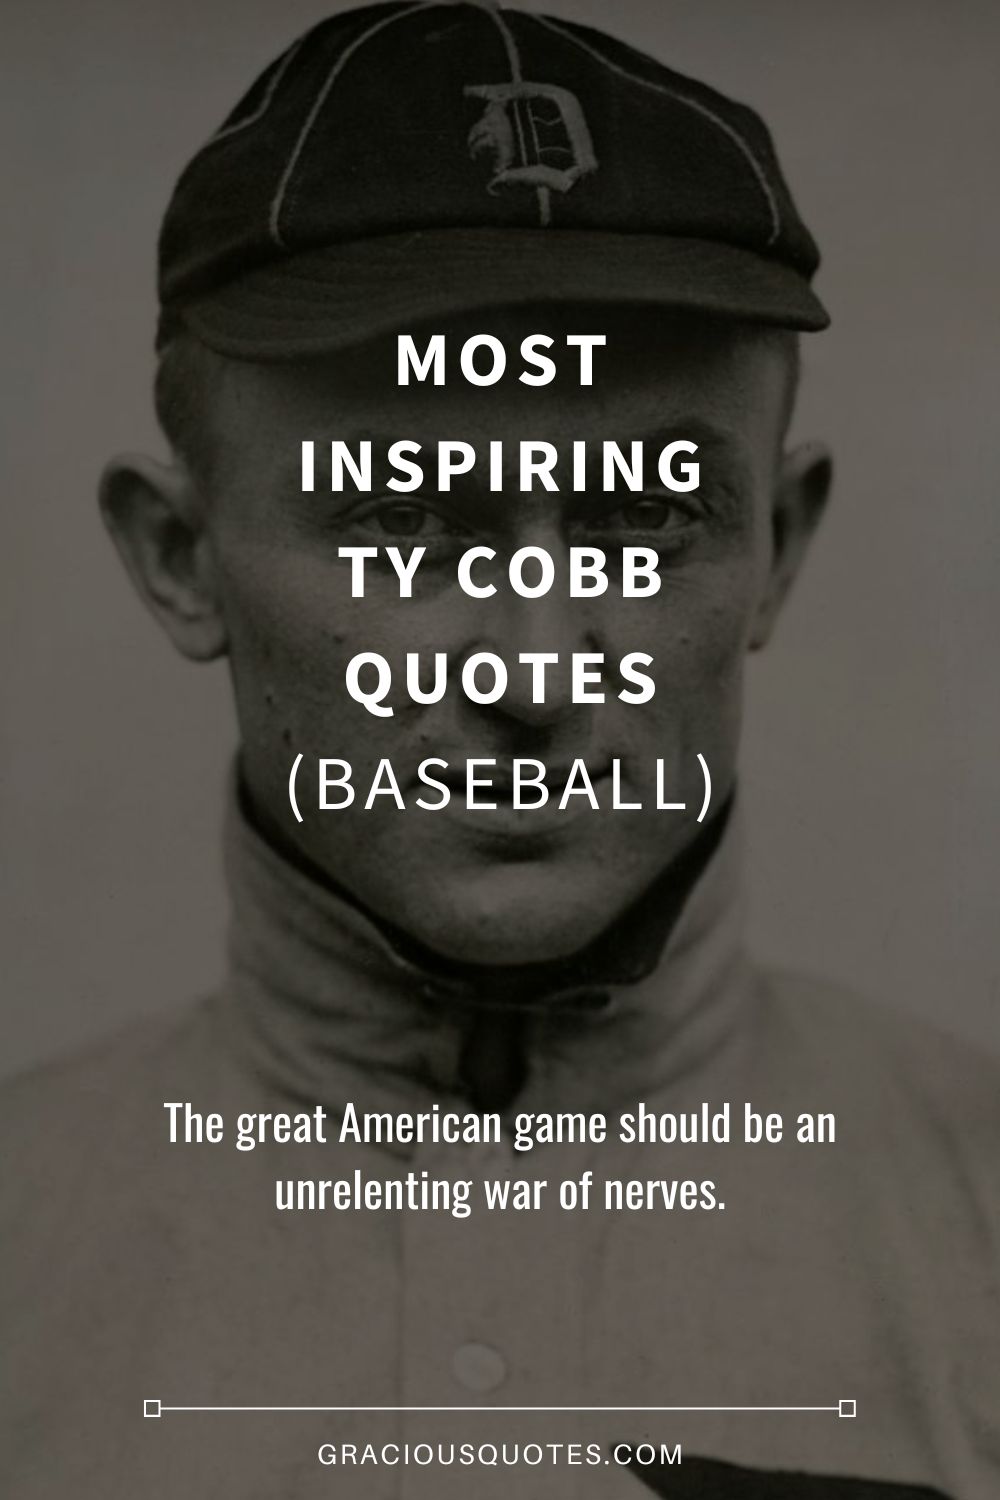 Most Inspiring Ty Cobb Quotes (BASEBALL) - Gracious Quotes